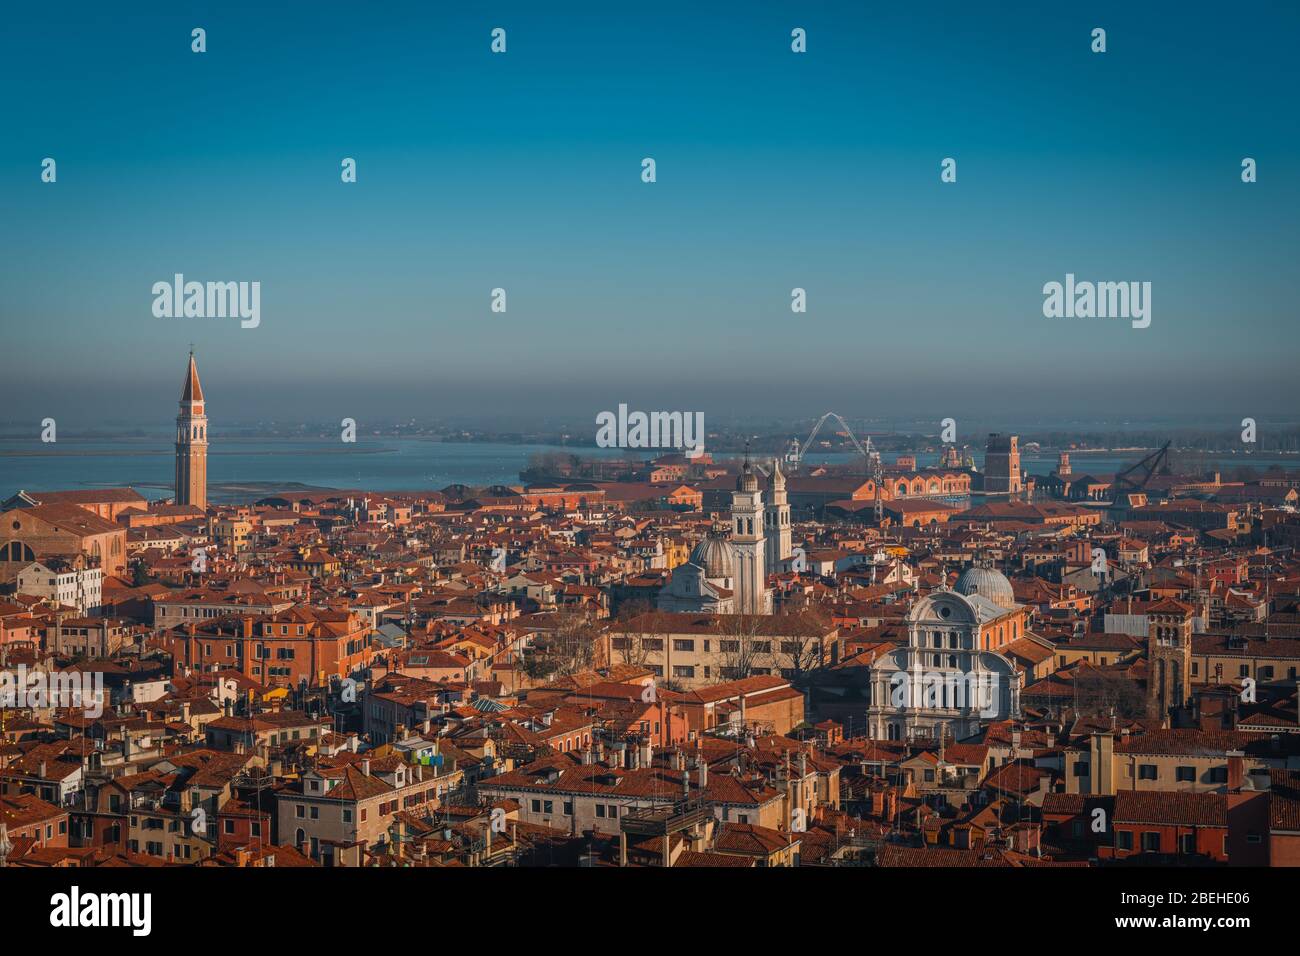 VENICE, VENETO / ITALY - DECEMBER 26 2019: Venice view from the roof before COVID-19 epidemic Stock Photo